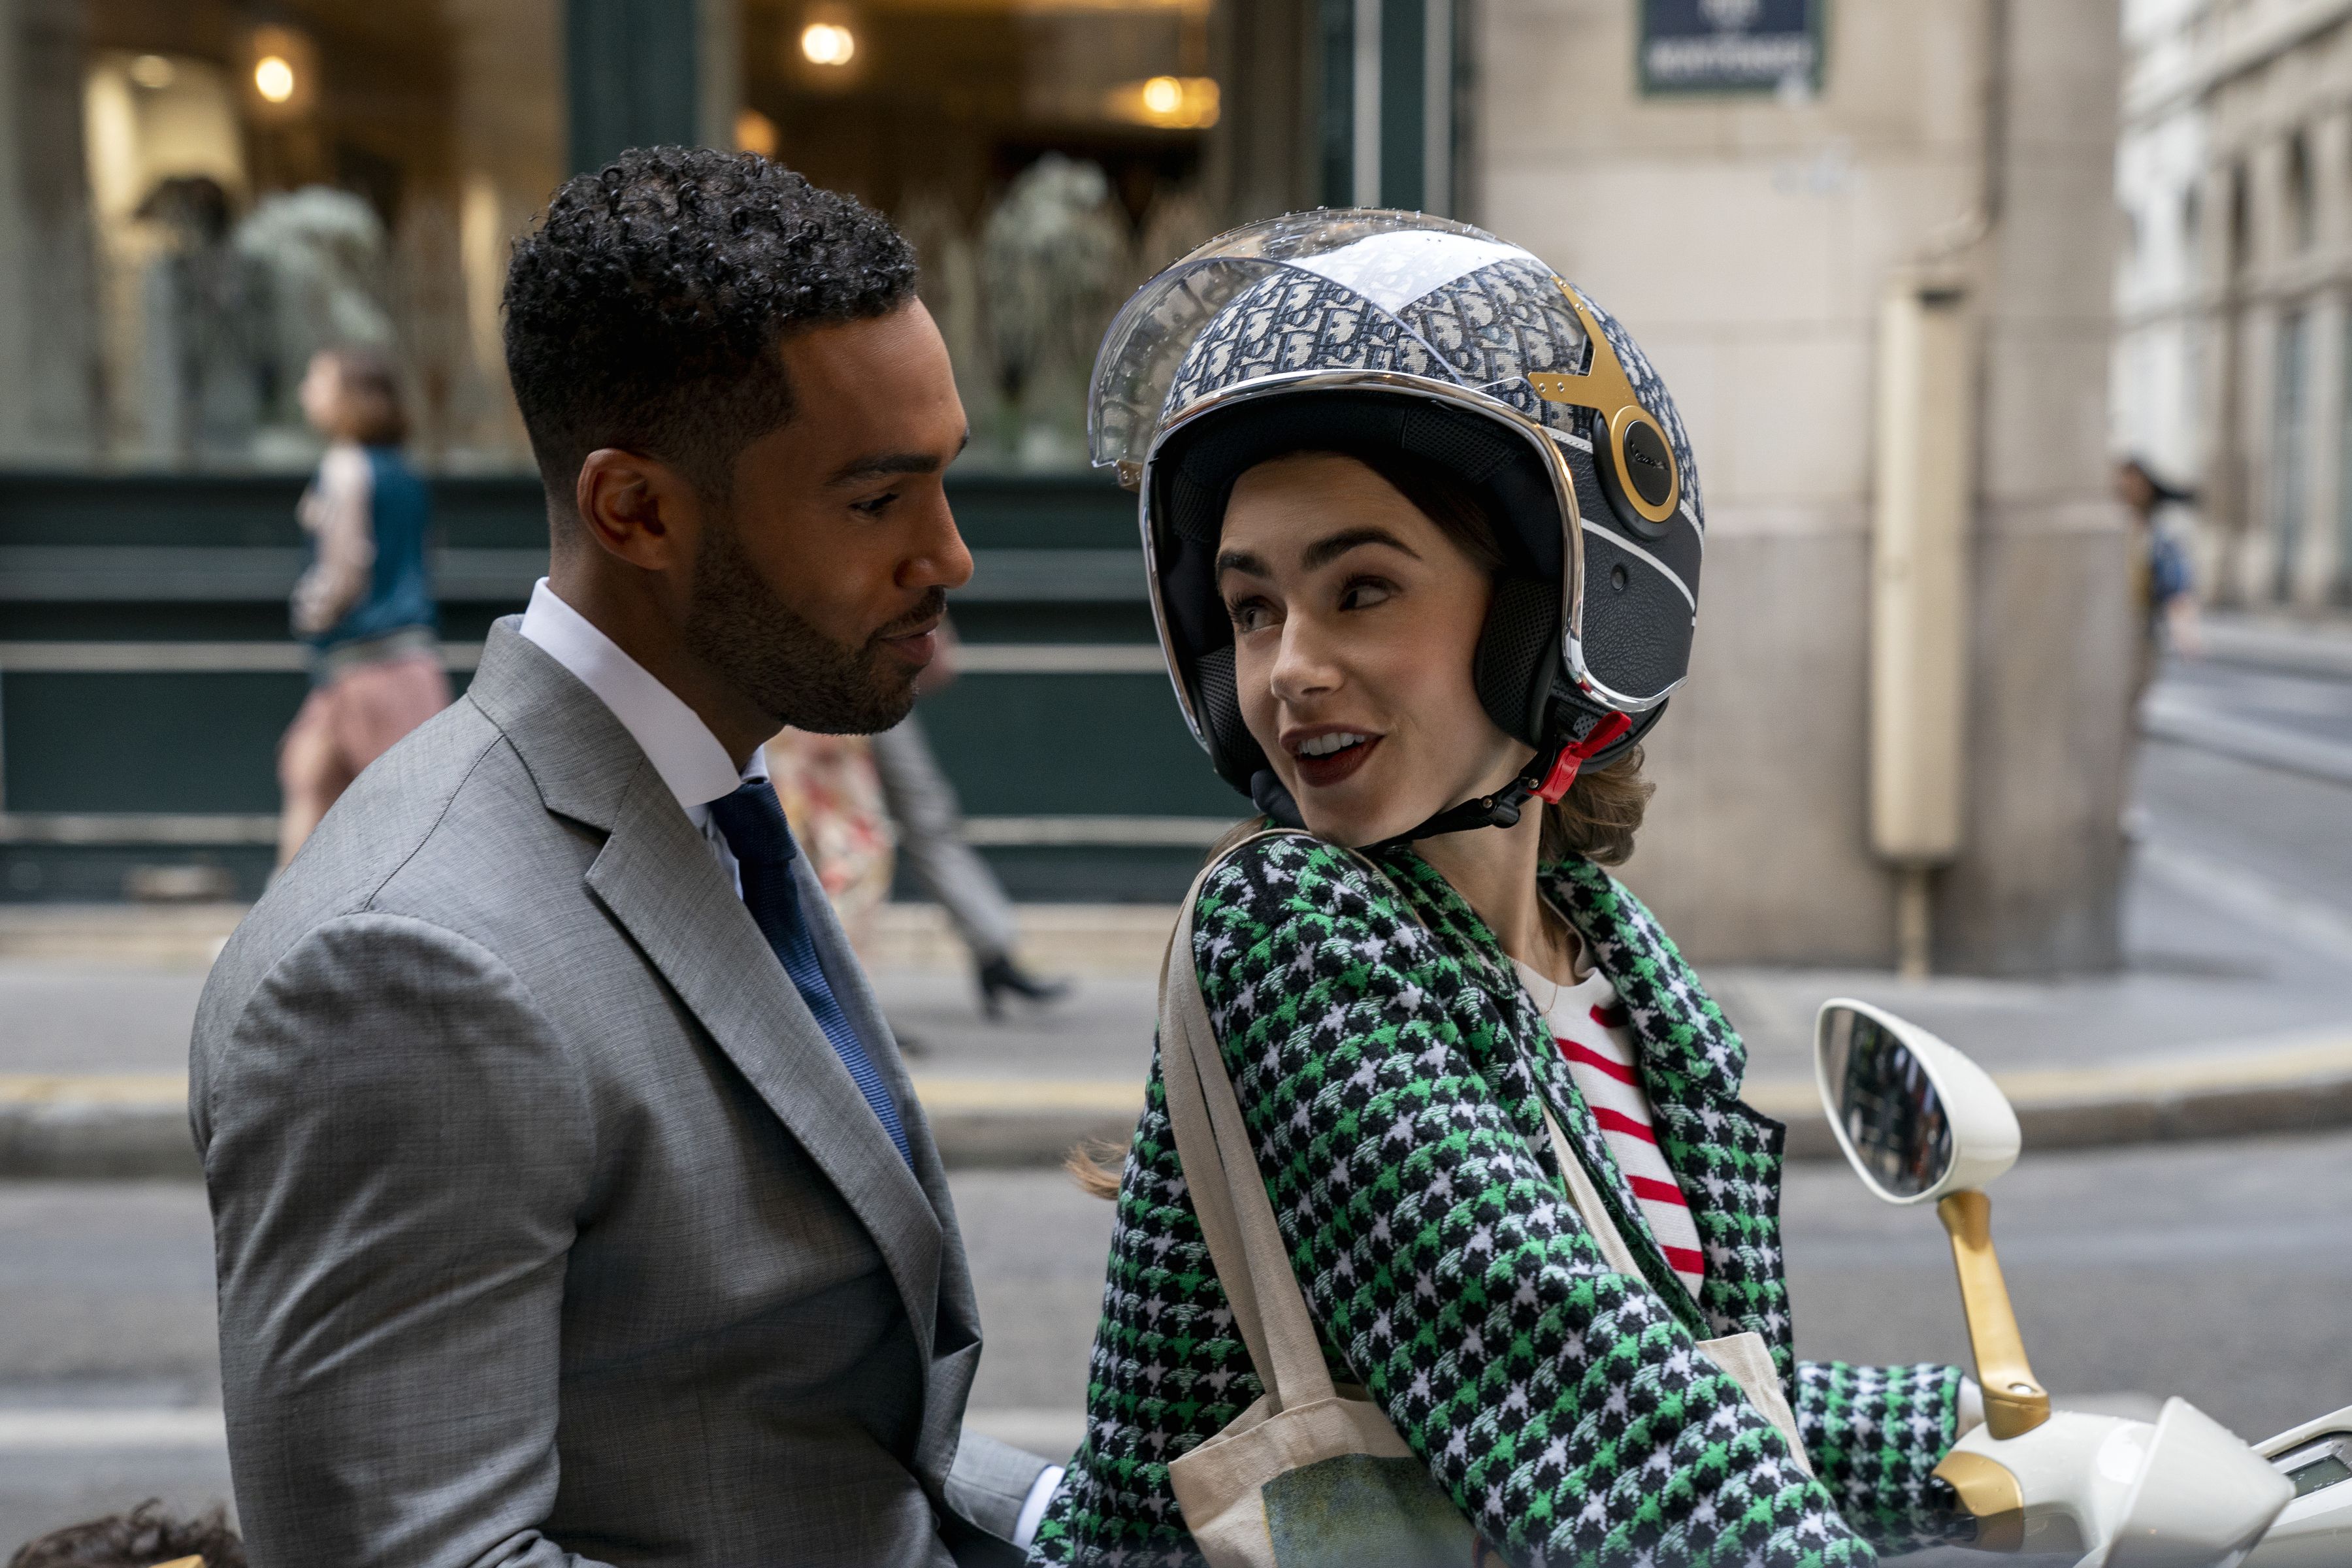 Emily in Paris': All the Bad Parts About Season 3 From French Person